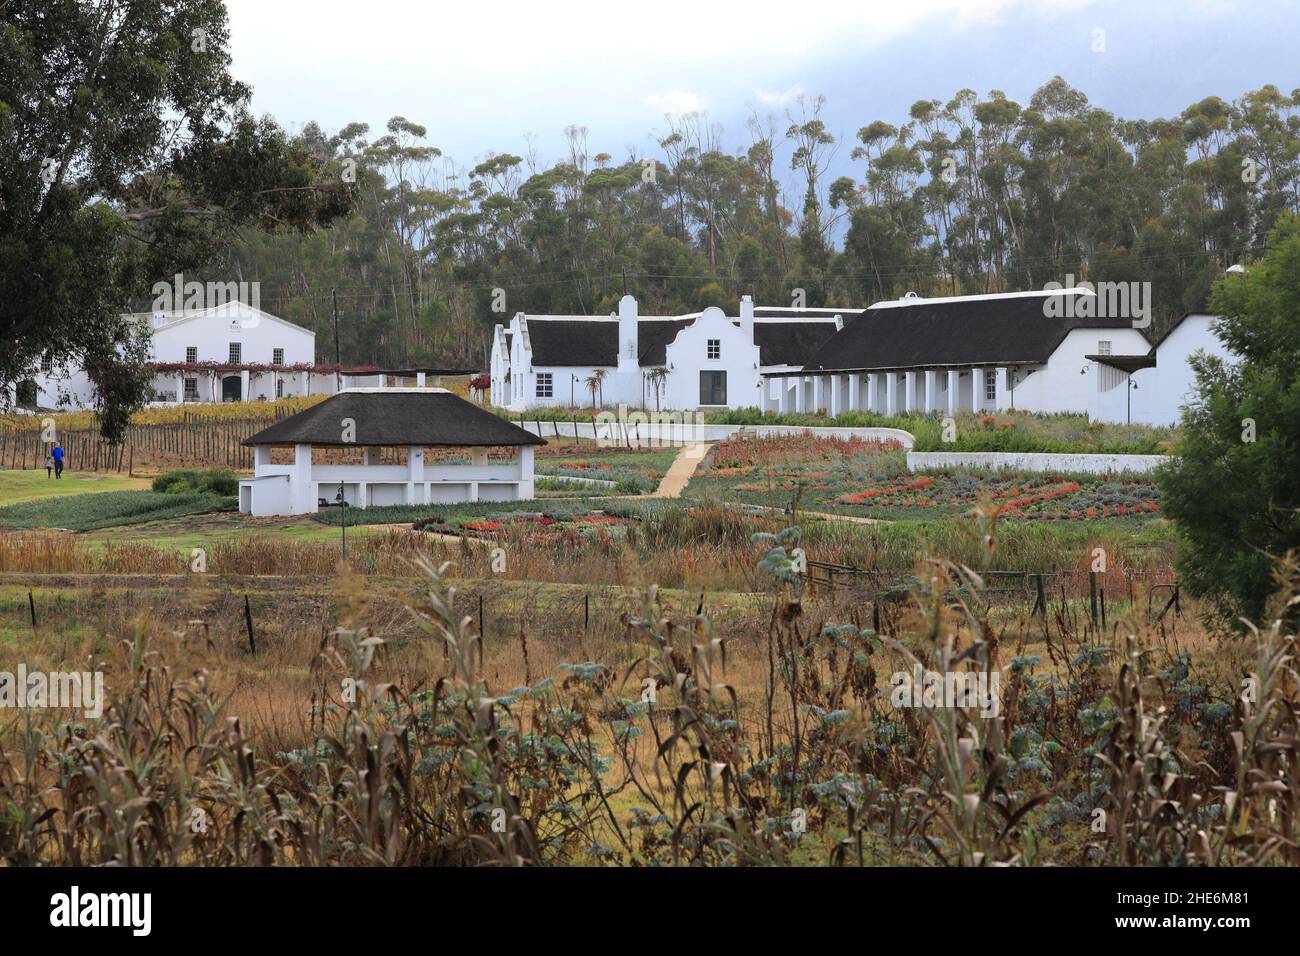 Manley Wine Estate, Tulbagh, Western Cape Province, South Africa. Stock Photo